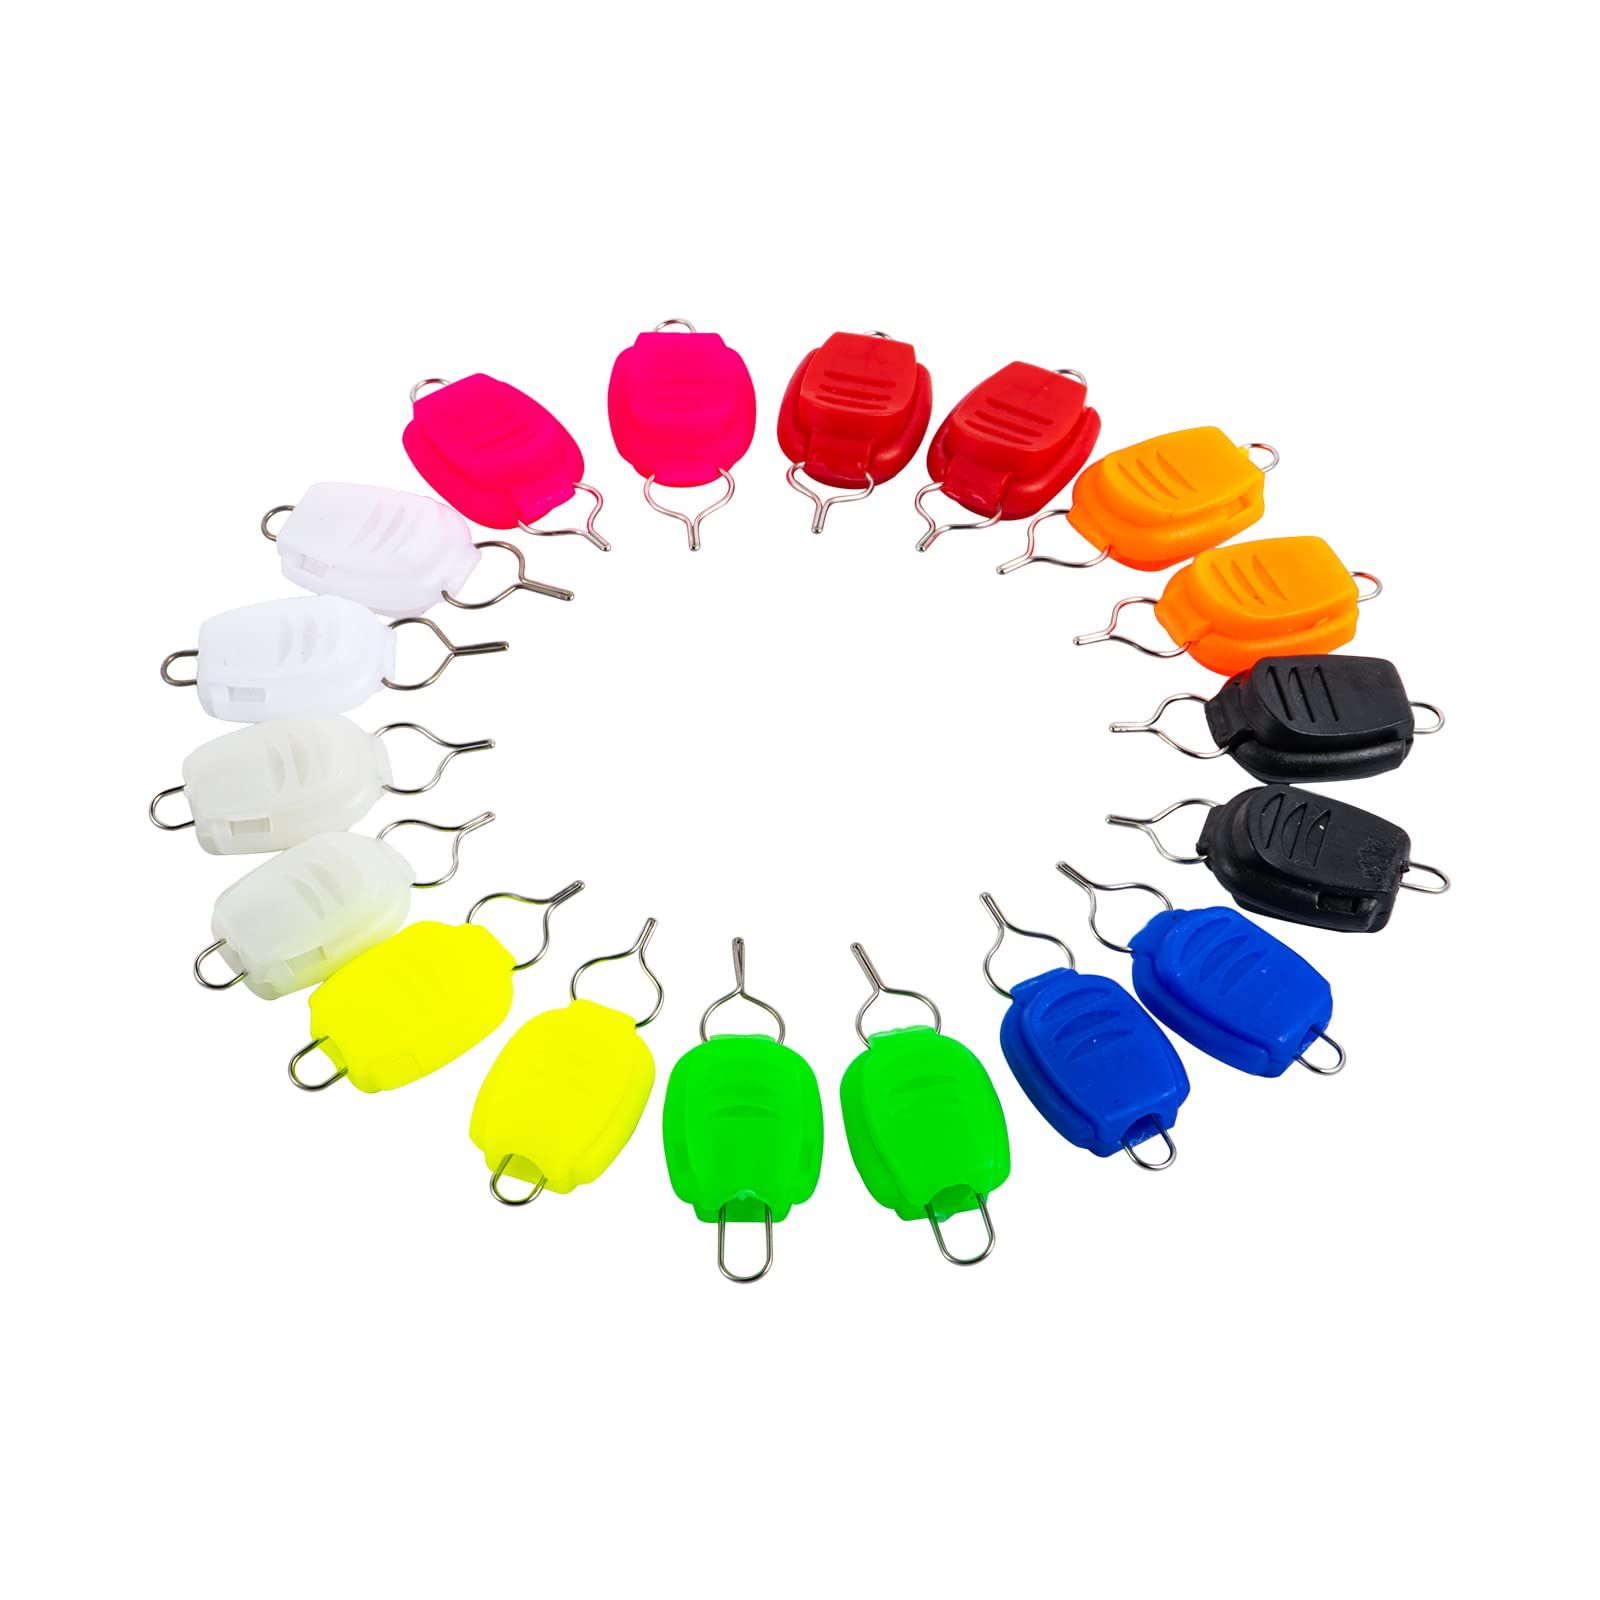 Uxcell Baitcasting Reel Fishing Line Holder Stopper Clip Buckle, 5 Colors  10 Pack